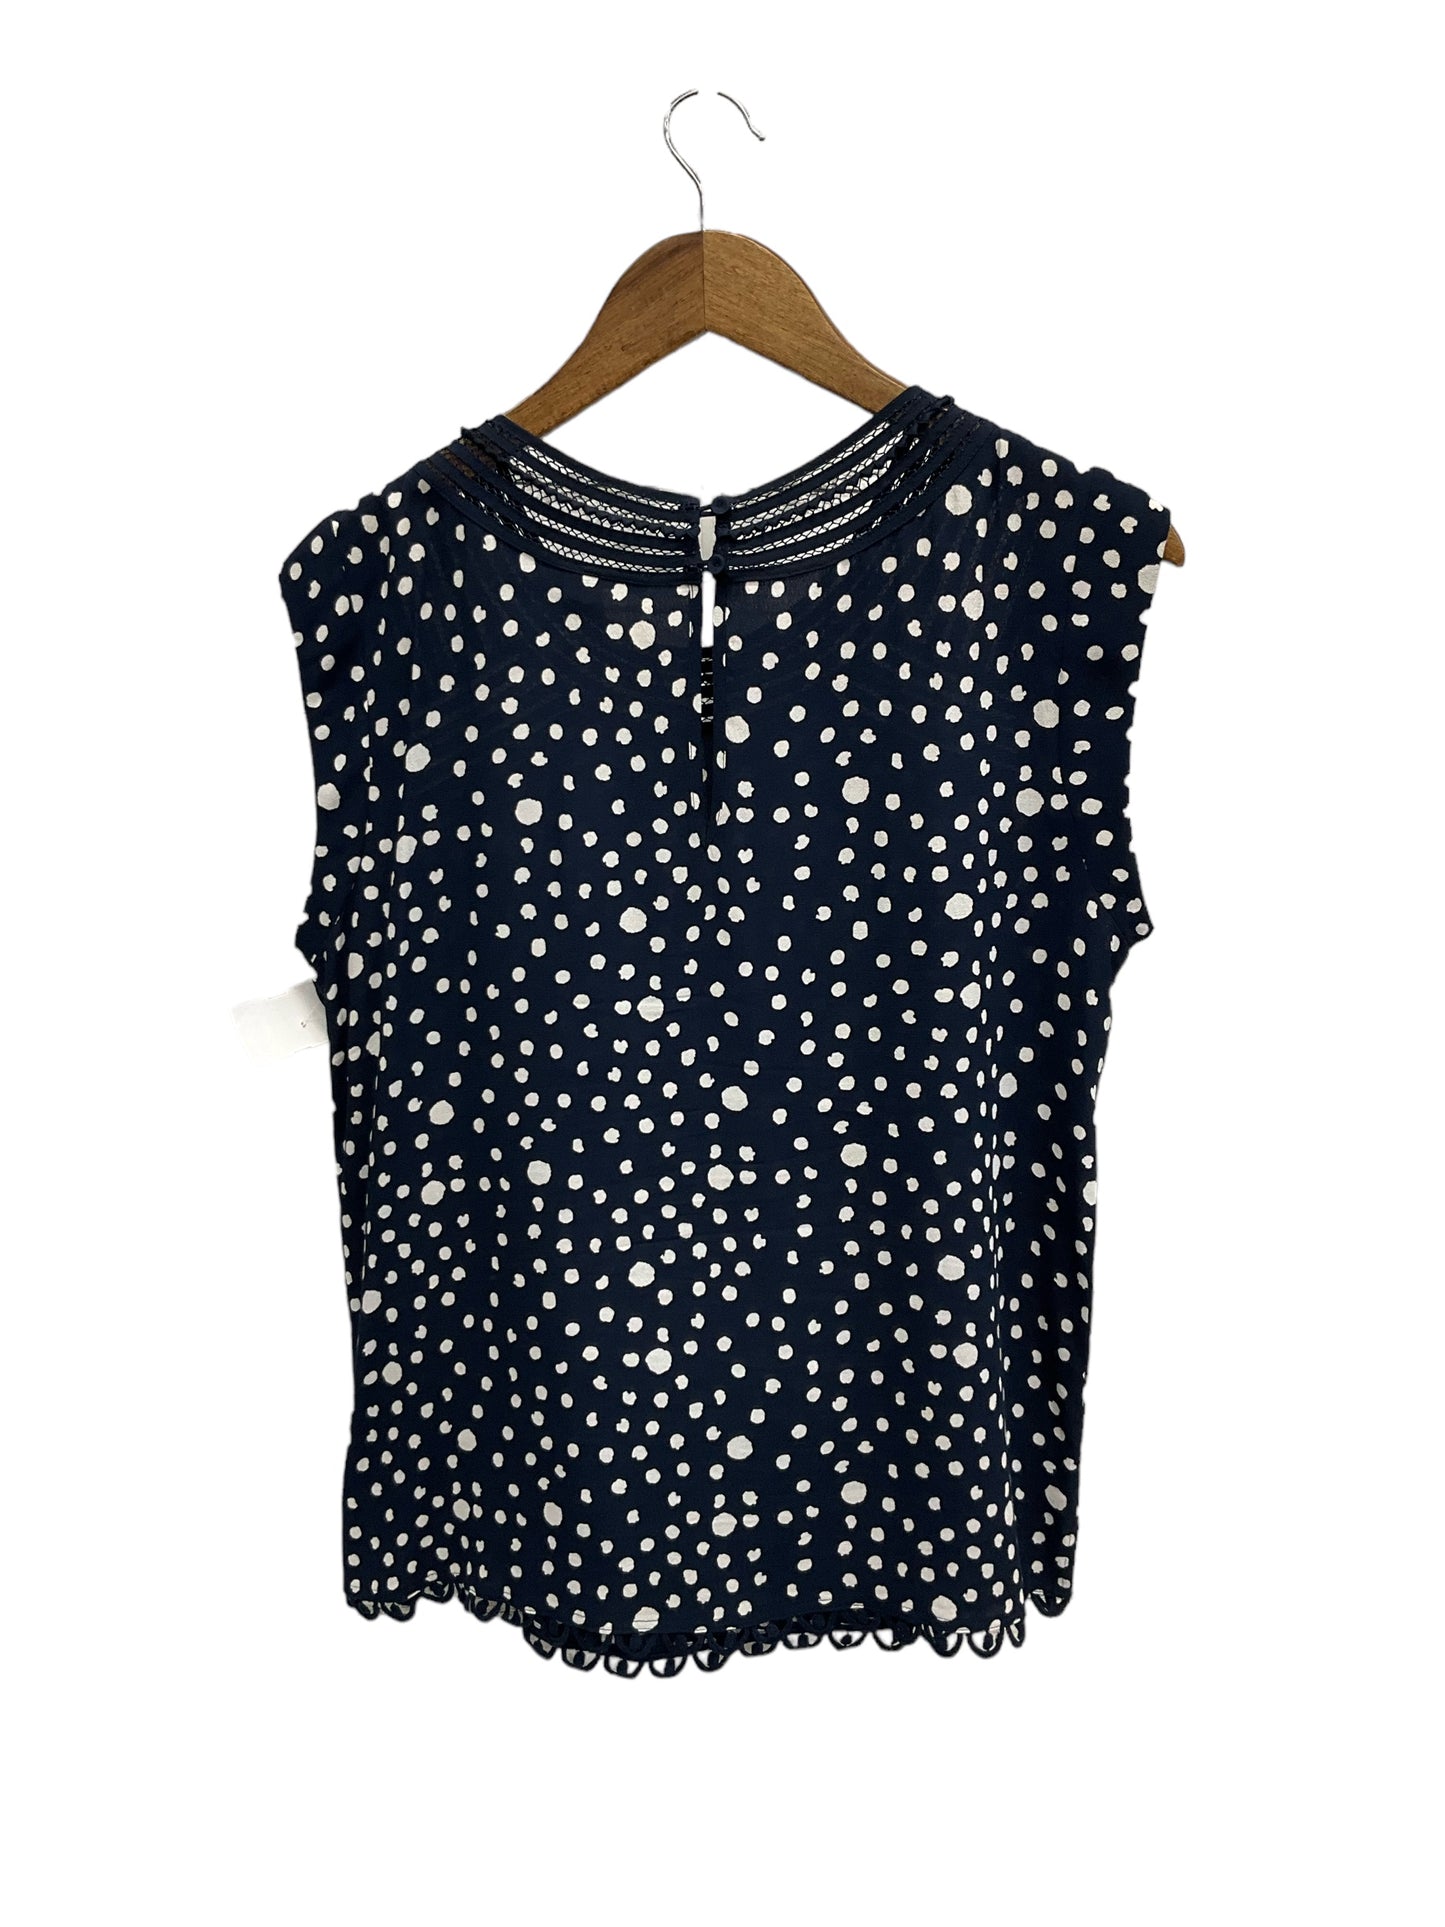 Top Sleeveless By Meadow Rue  Size: M